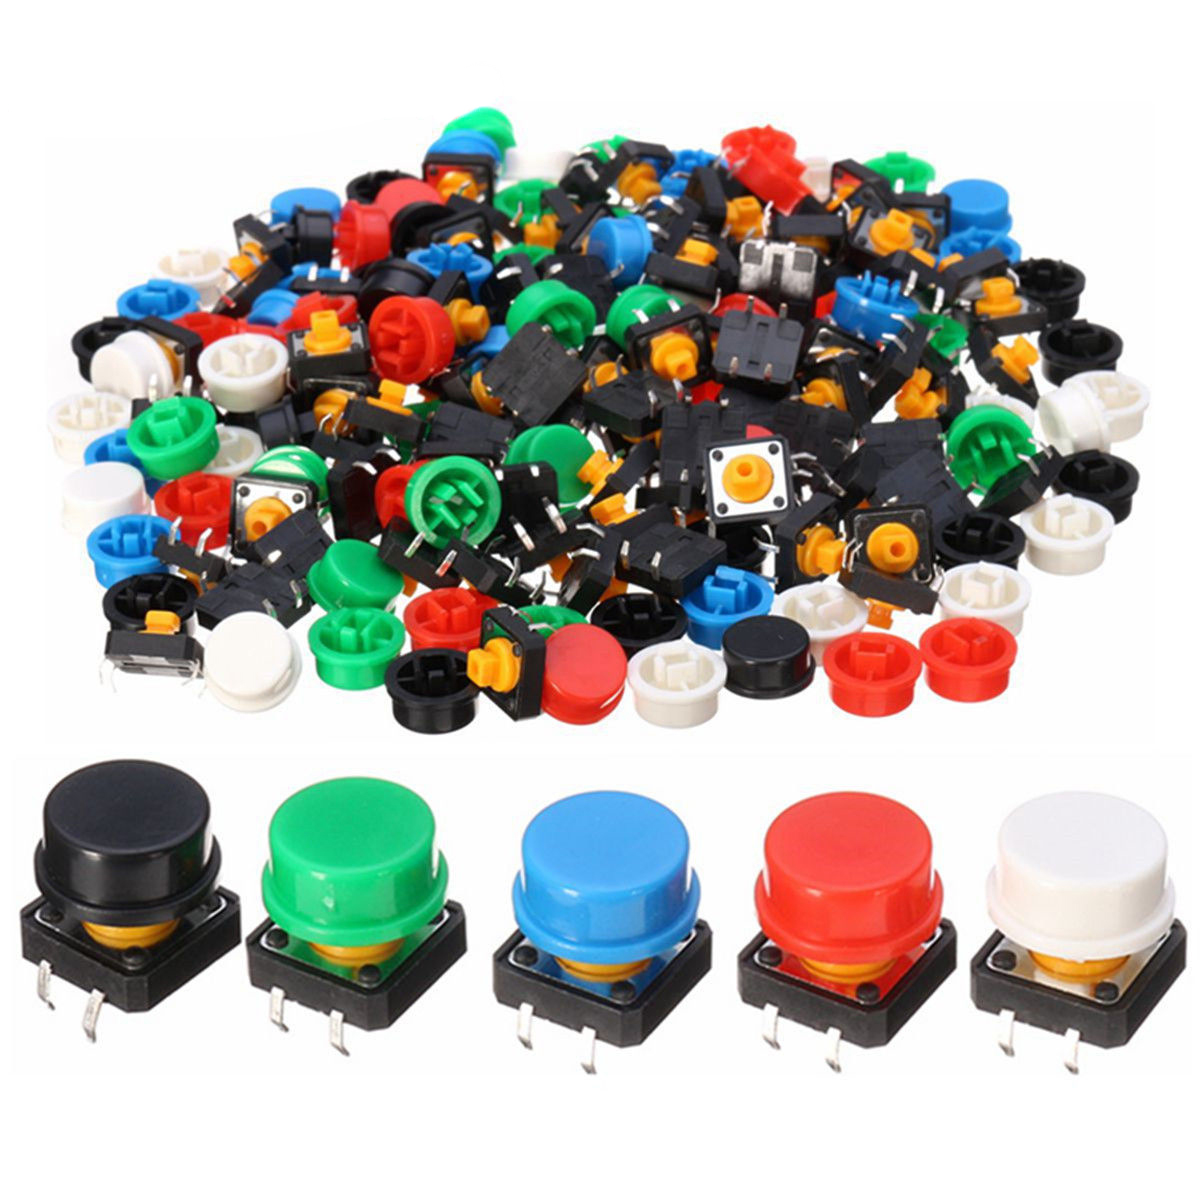 100pcs Plastic Tactile Switch PCB Tact Push Button Momentary Switch 4 Pins + 5 Color Button Cap 12*12*7.3mm Mayitr